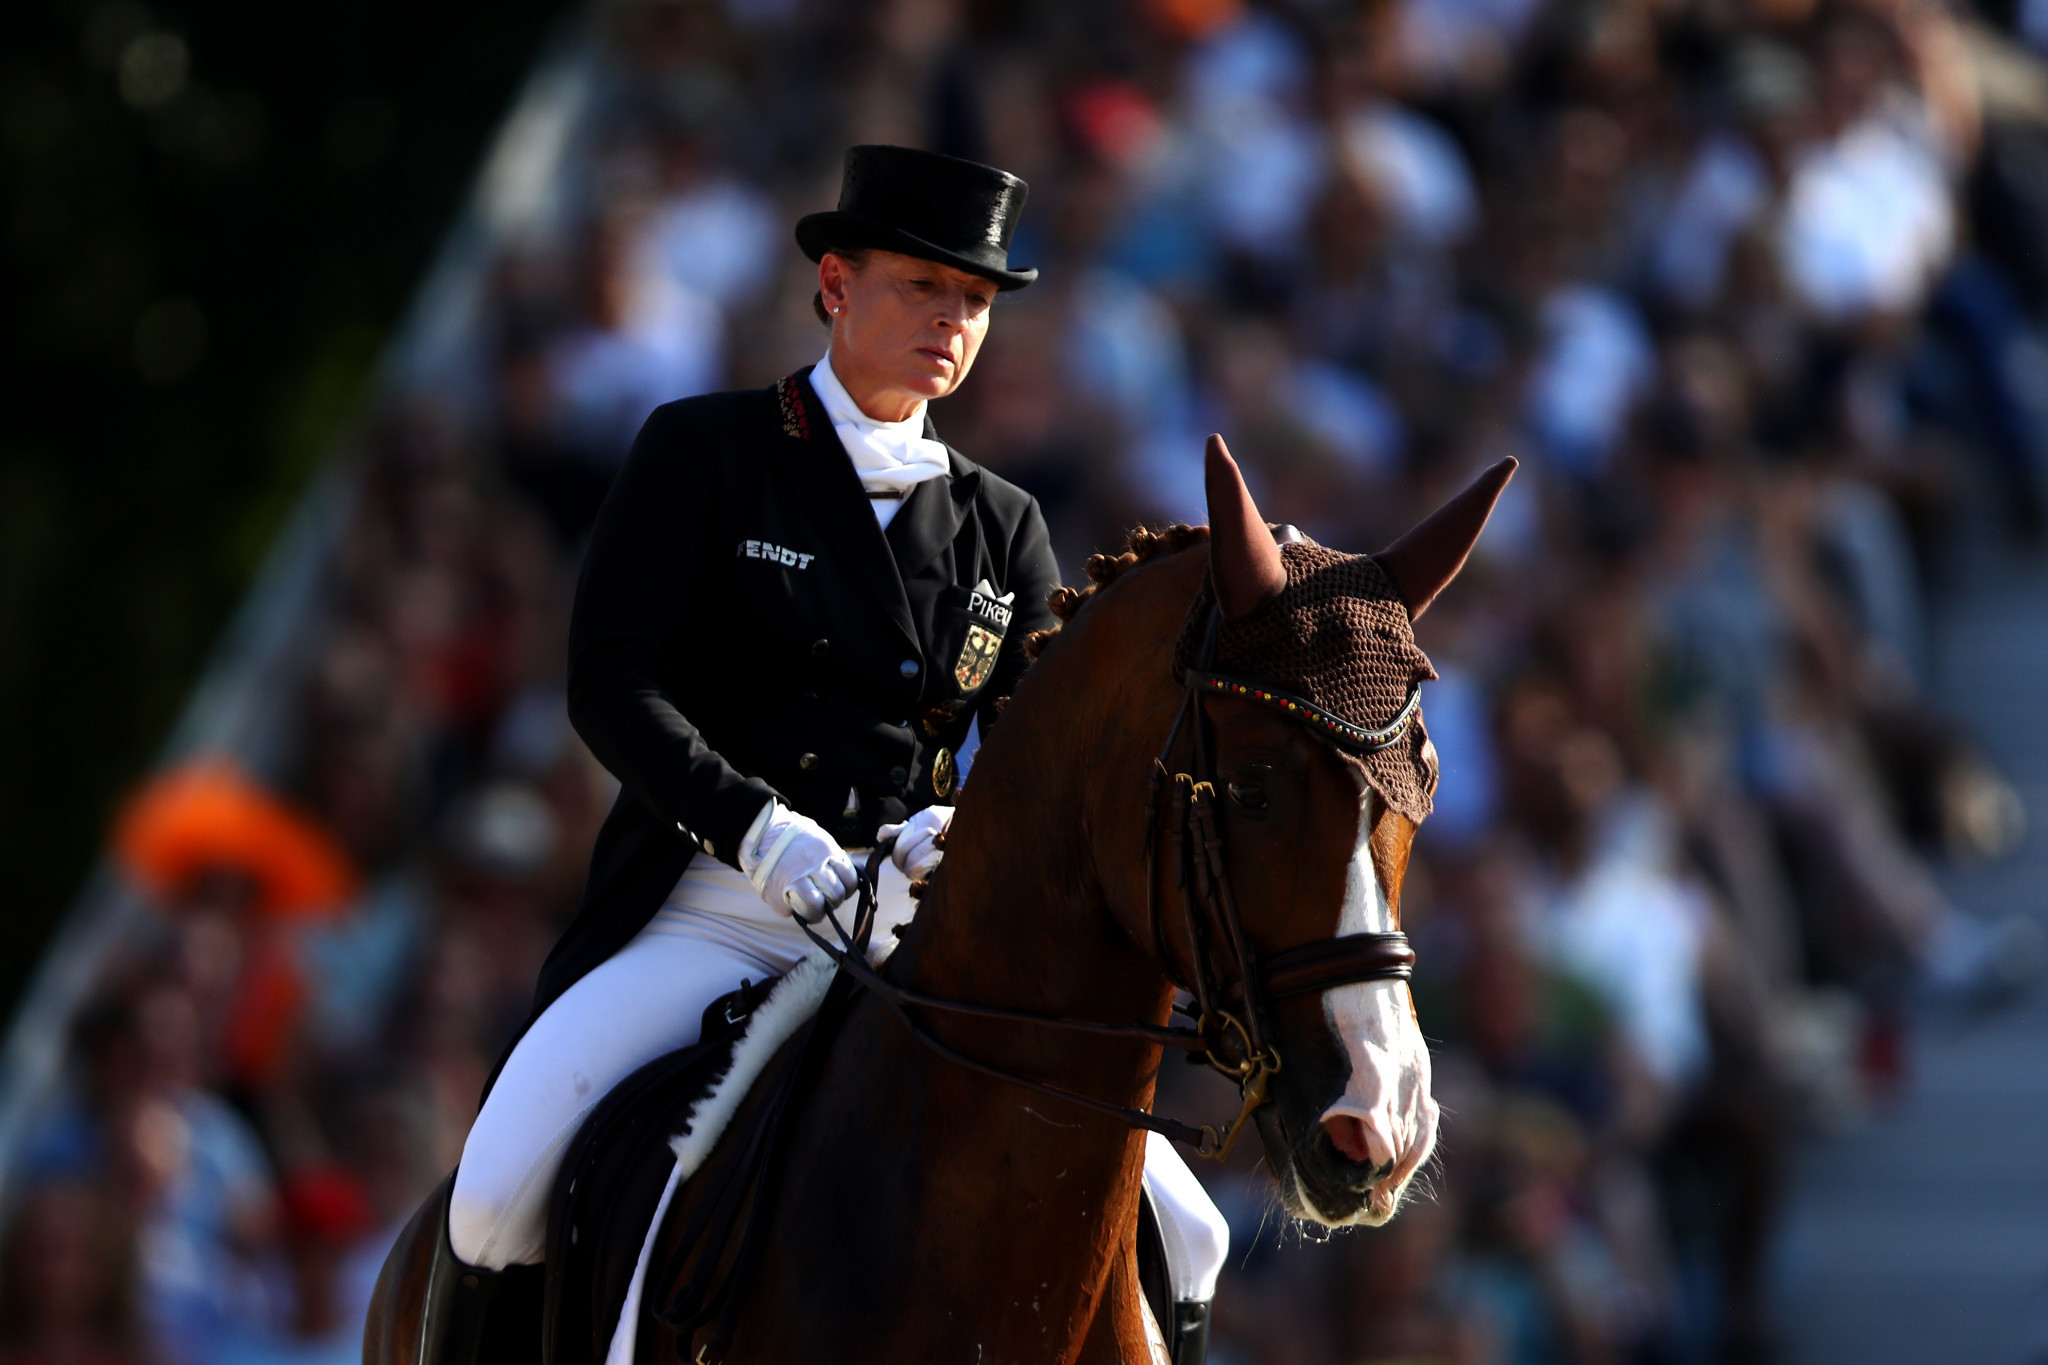 Six-time Olympic champion Werth elected Club of International Dressage Riders chair